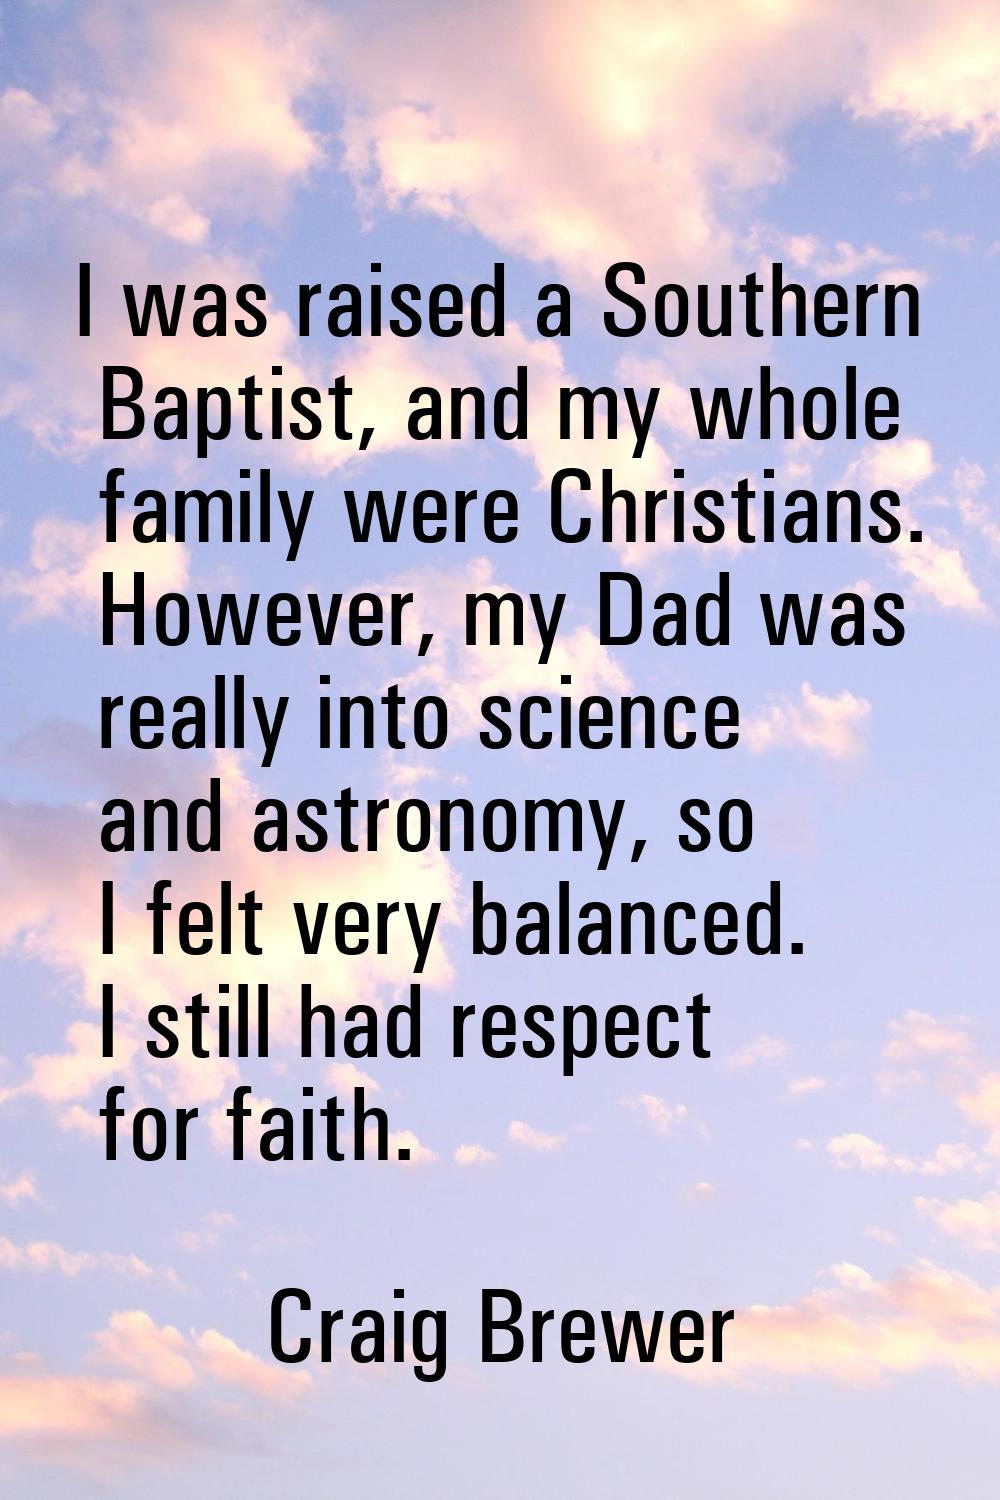 I was raised a Southern Baptist, and my whole family were Christians. However, my Dad was really in